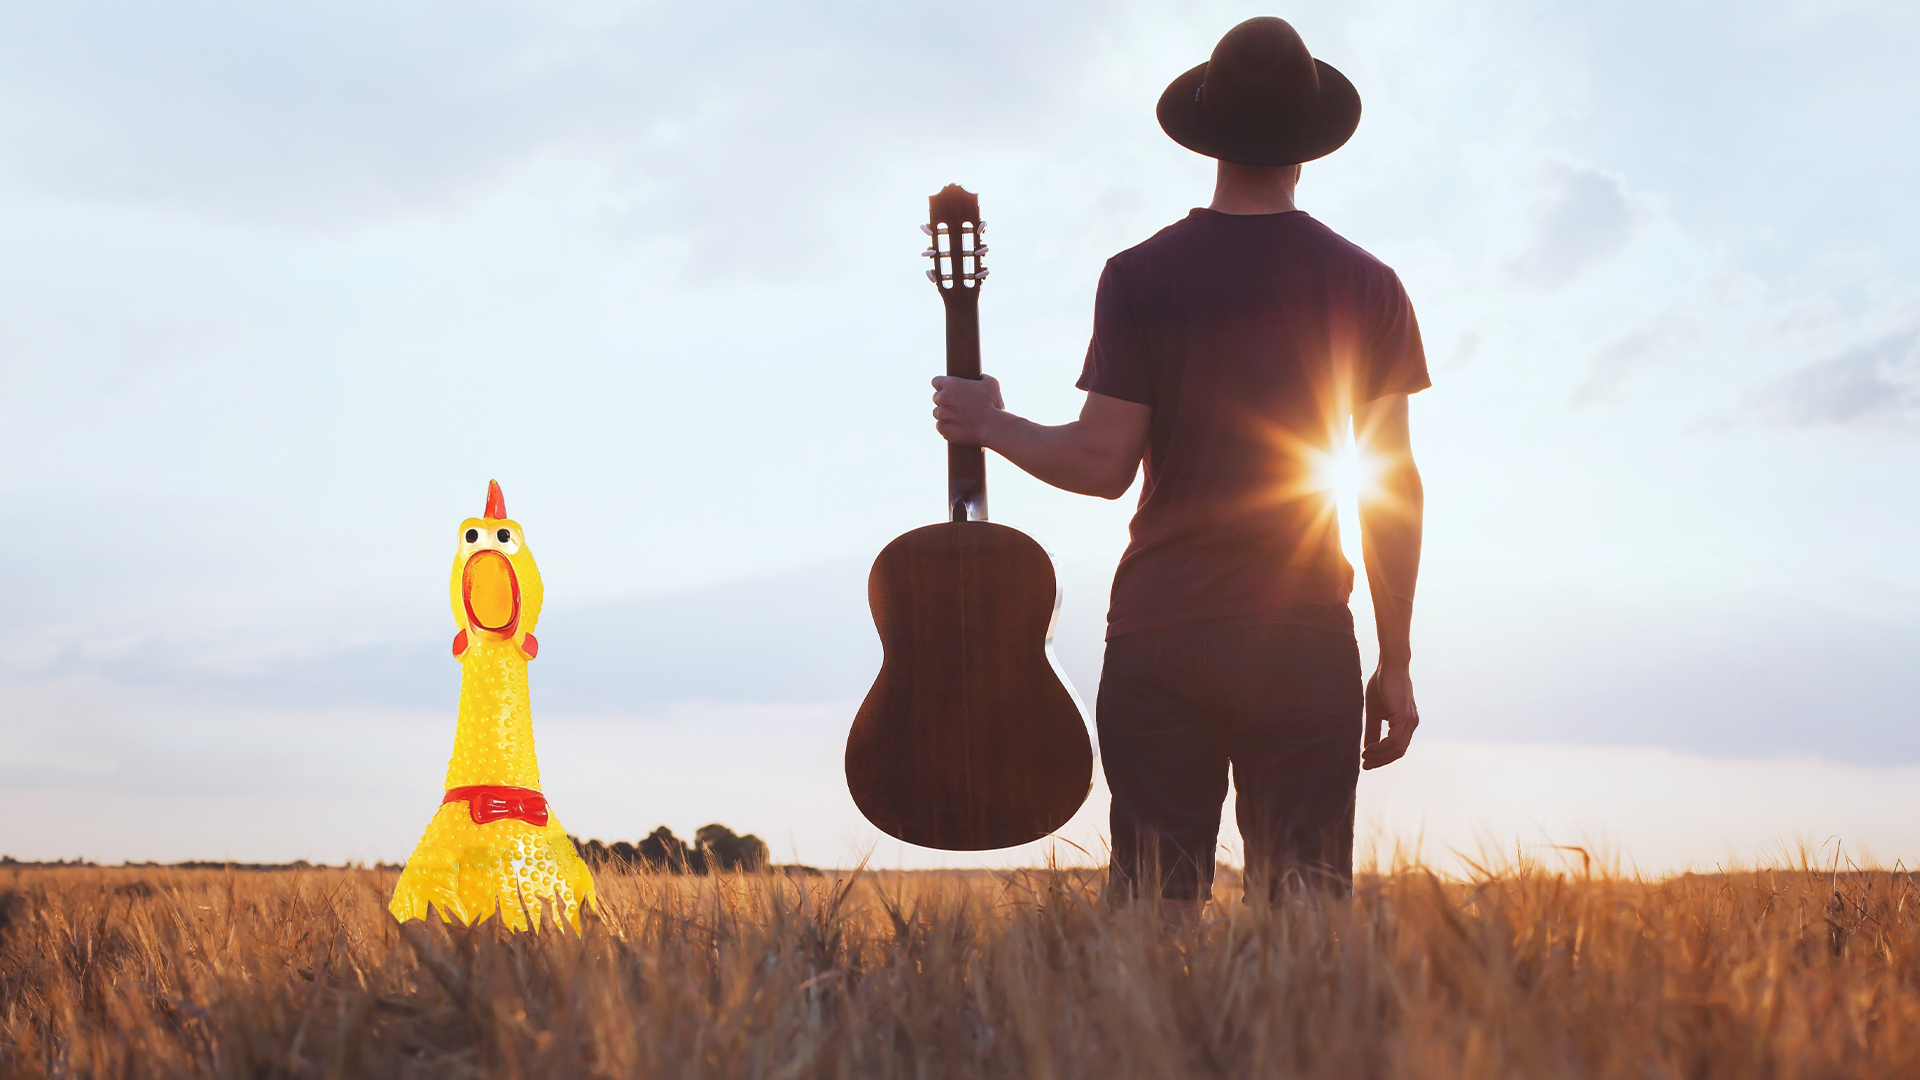 Man with guitar and cowboy hat in a field, with rubber chicken peeking out from the grass